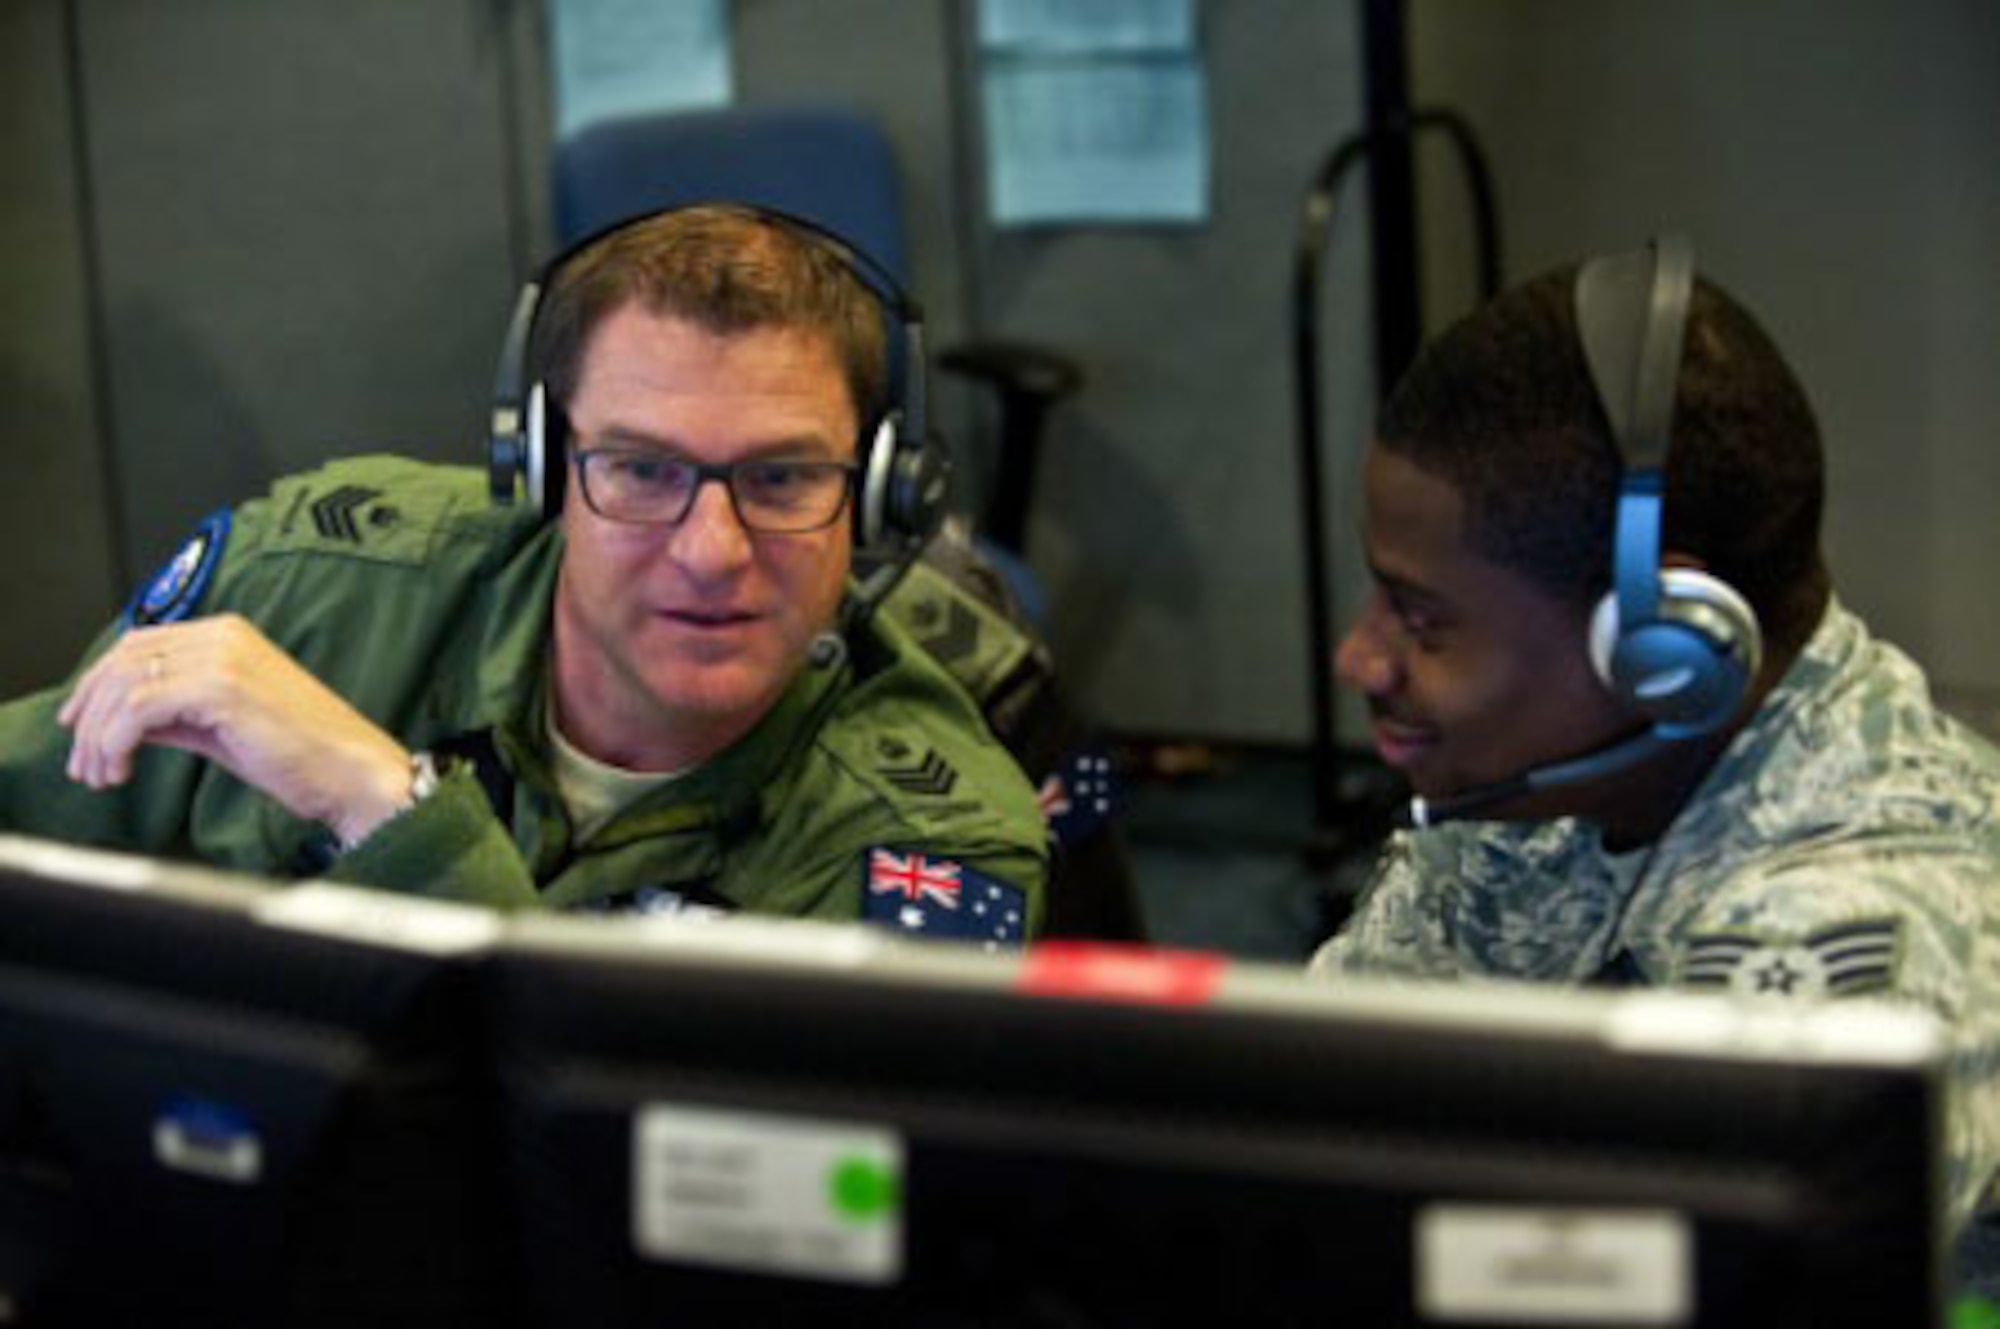 Royal Australian Air Force Flight Sgt. Sean Bedford (left), and Senior Airman Frederick Riggans-Huguley analyze air missile defense systems inside the Combined Air and Space Operations Center-Nellis during Red Flag 14-1 Feb. 5, 2014, at Nellis Air Force Base, Nev. Bedford is a space duty technician with the Australian Space Operations Centre in New Norcia, Australia, and Riggins-Huguley is a space duty technician with the 603rd Air and Space Operations Center at Ramstein Air Base, Germany. Space duty technicians direct air missile ballistic warnings and provide communication to combat search and rescue teams. (U.S. Air Force photo/Senior Airman Brett Clashman)